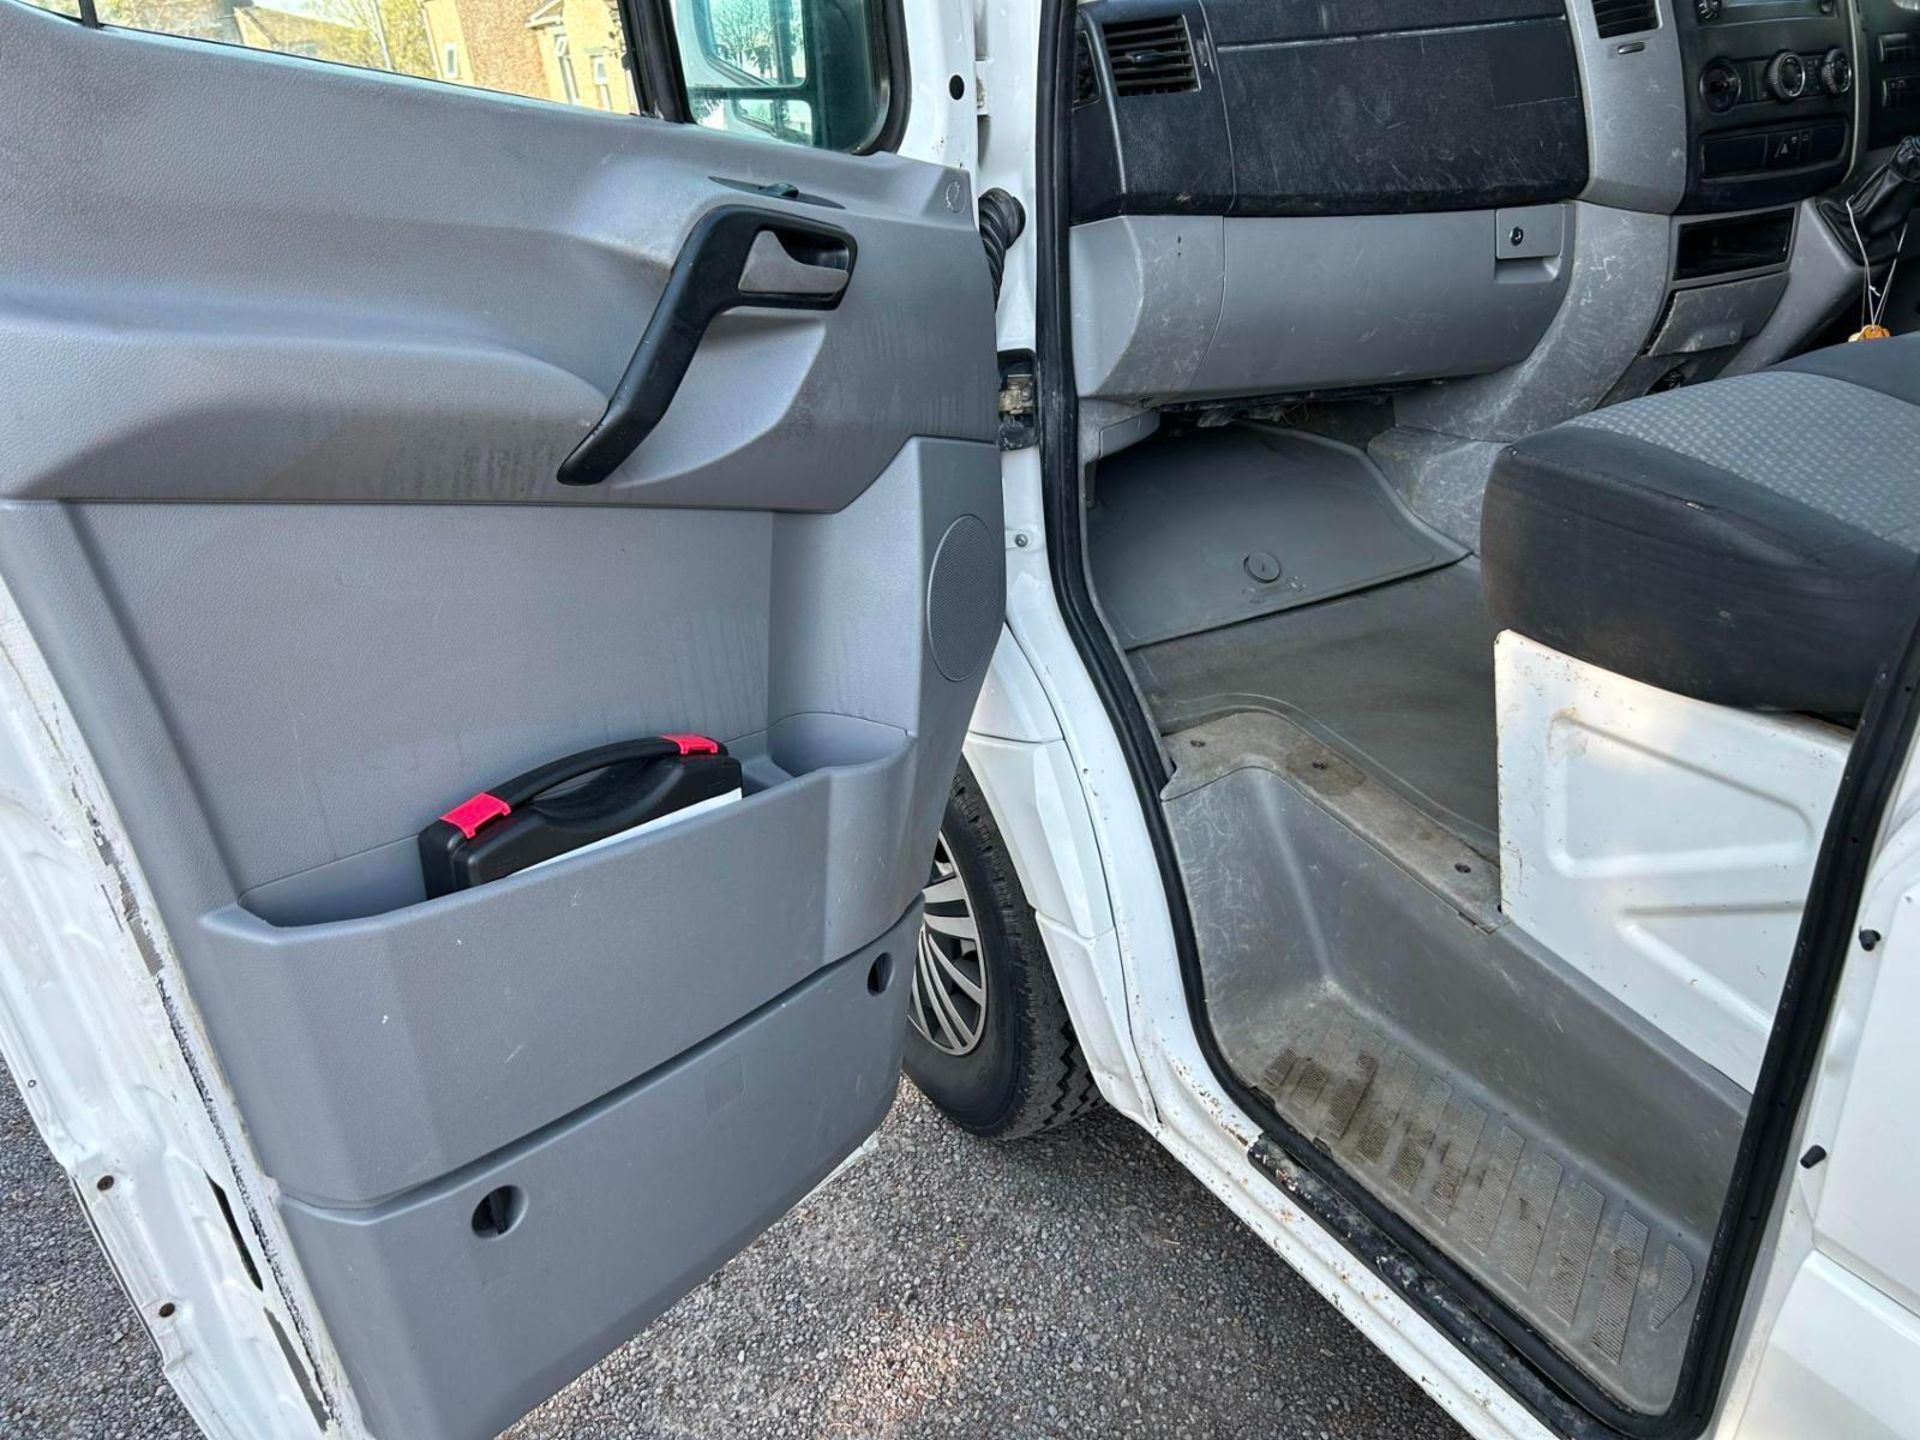 2014 VOLKSWAGEN CRAFTER CR35 TDI 136BHP - RELIABLE LONG WHEEL BASE 17FT RECOVERY VEHICLE - Image 6 of 16